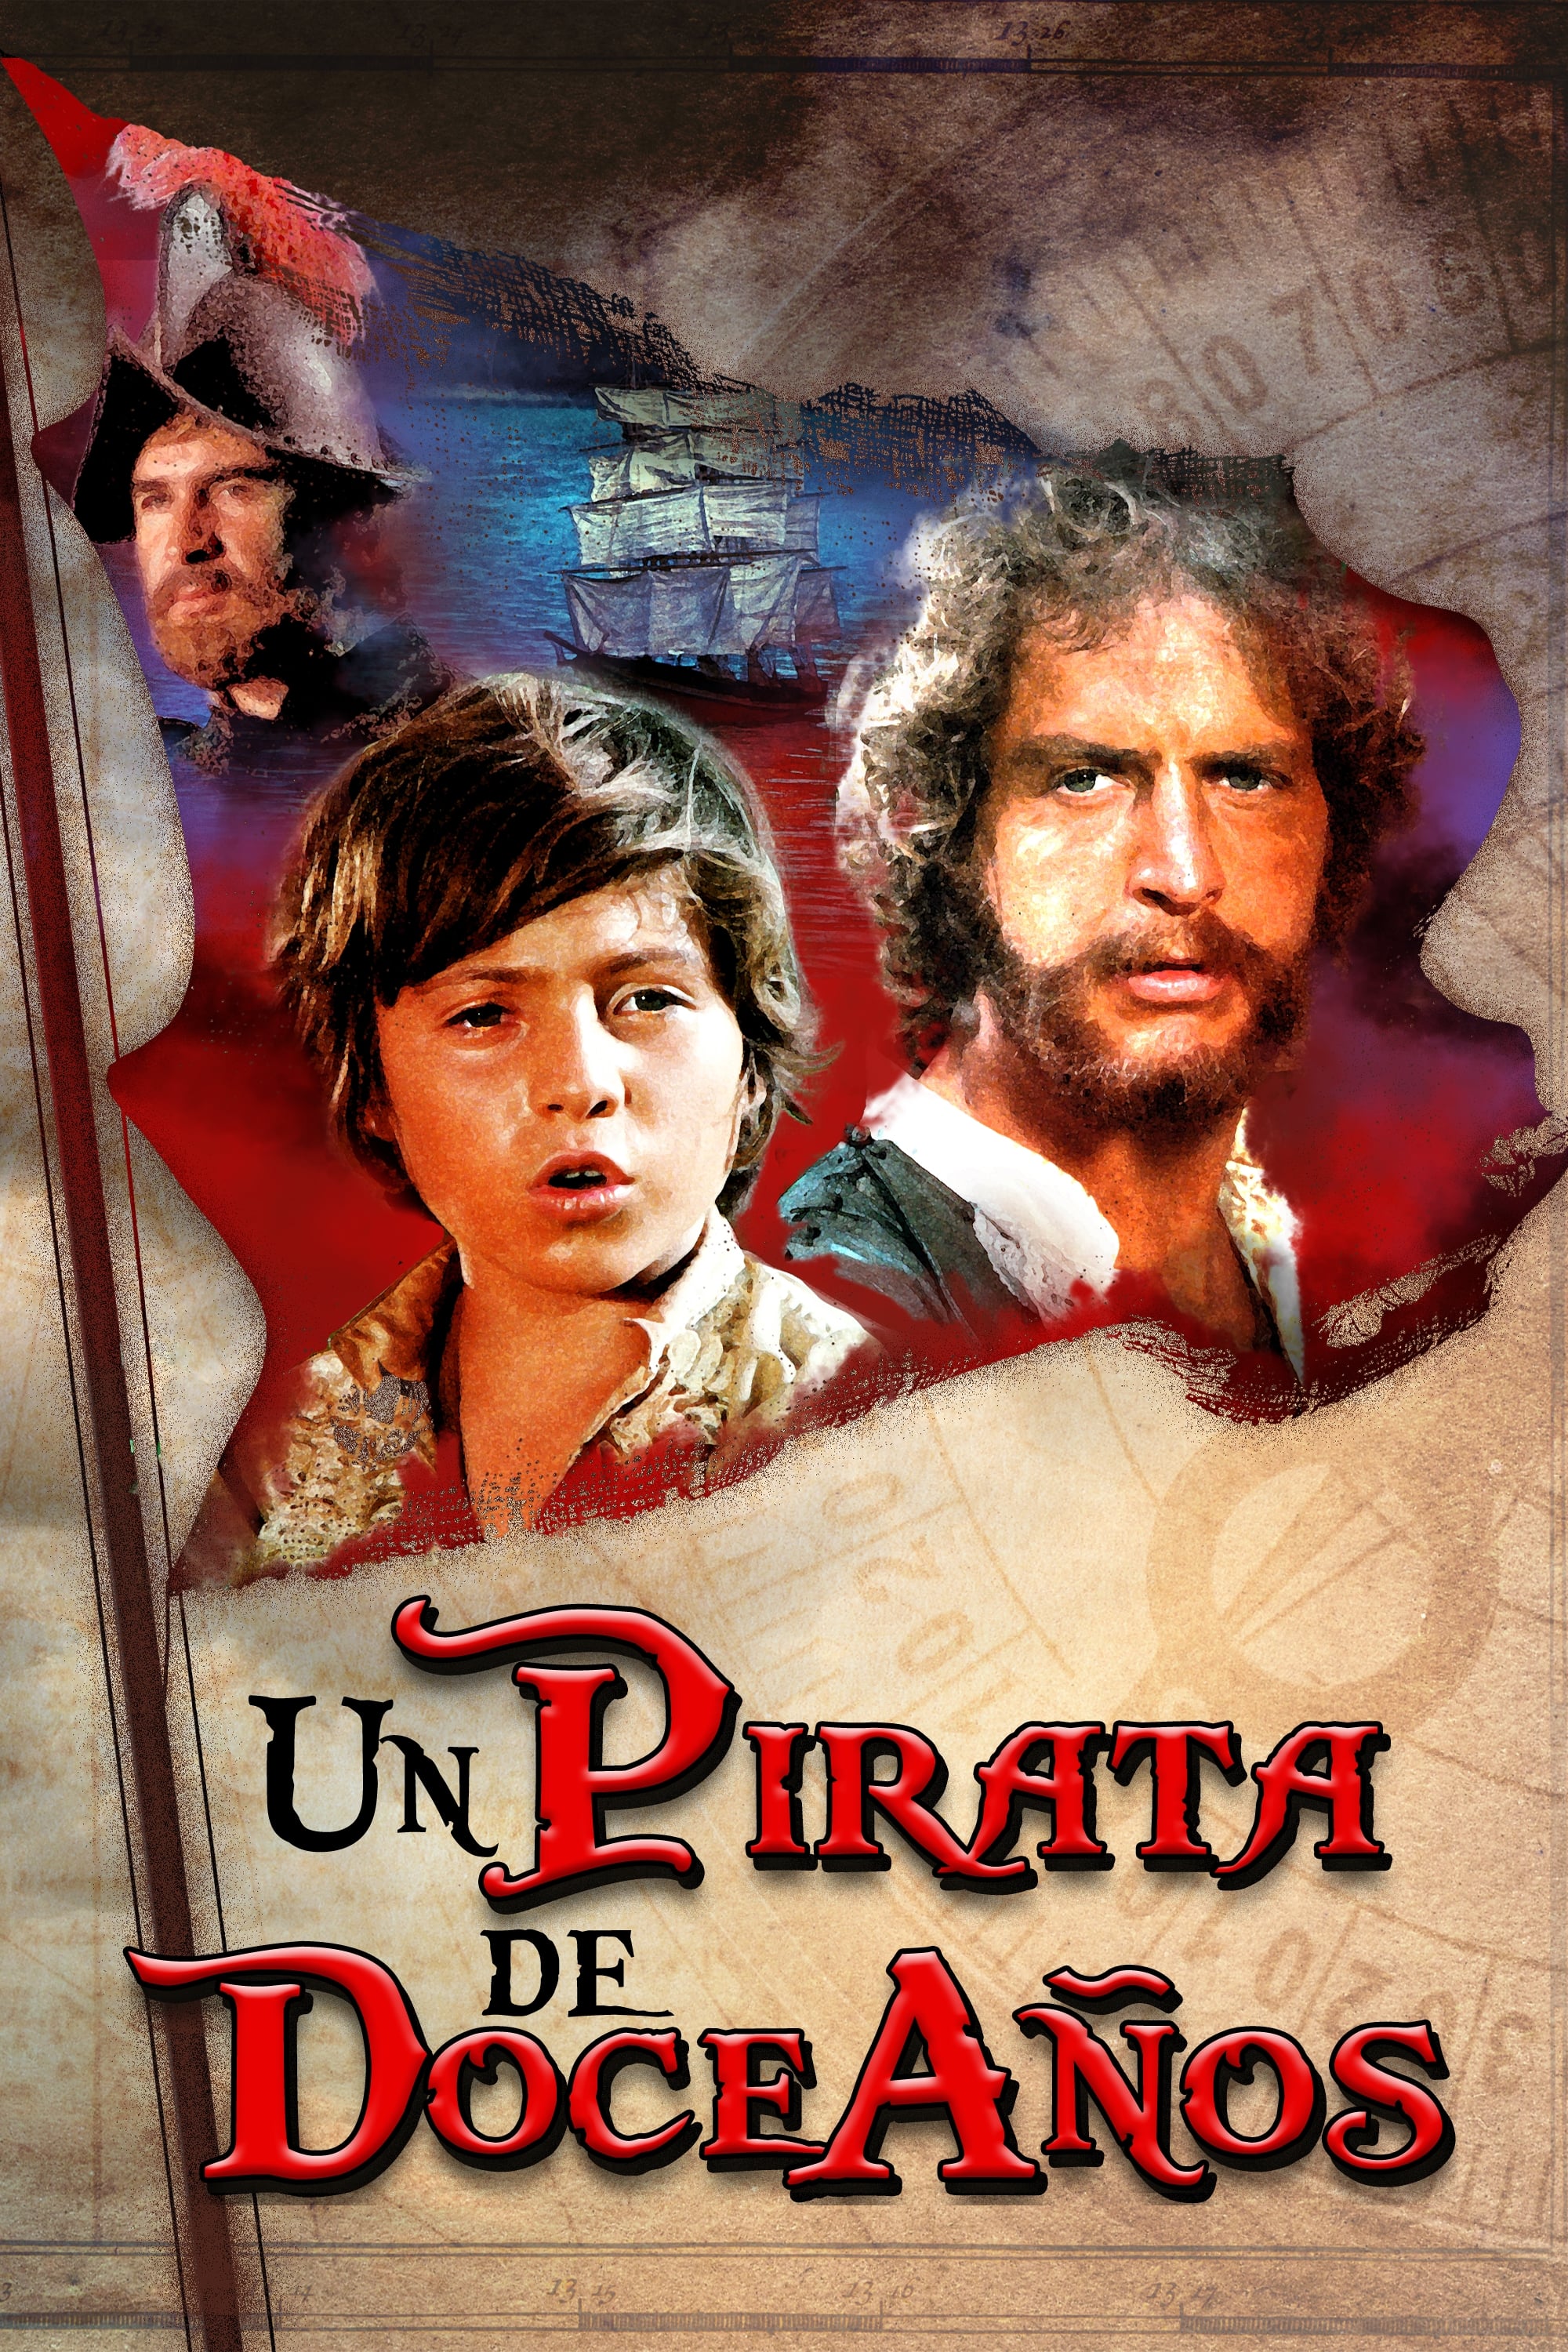 A Twelve Year Old Pirate (1972)